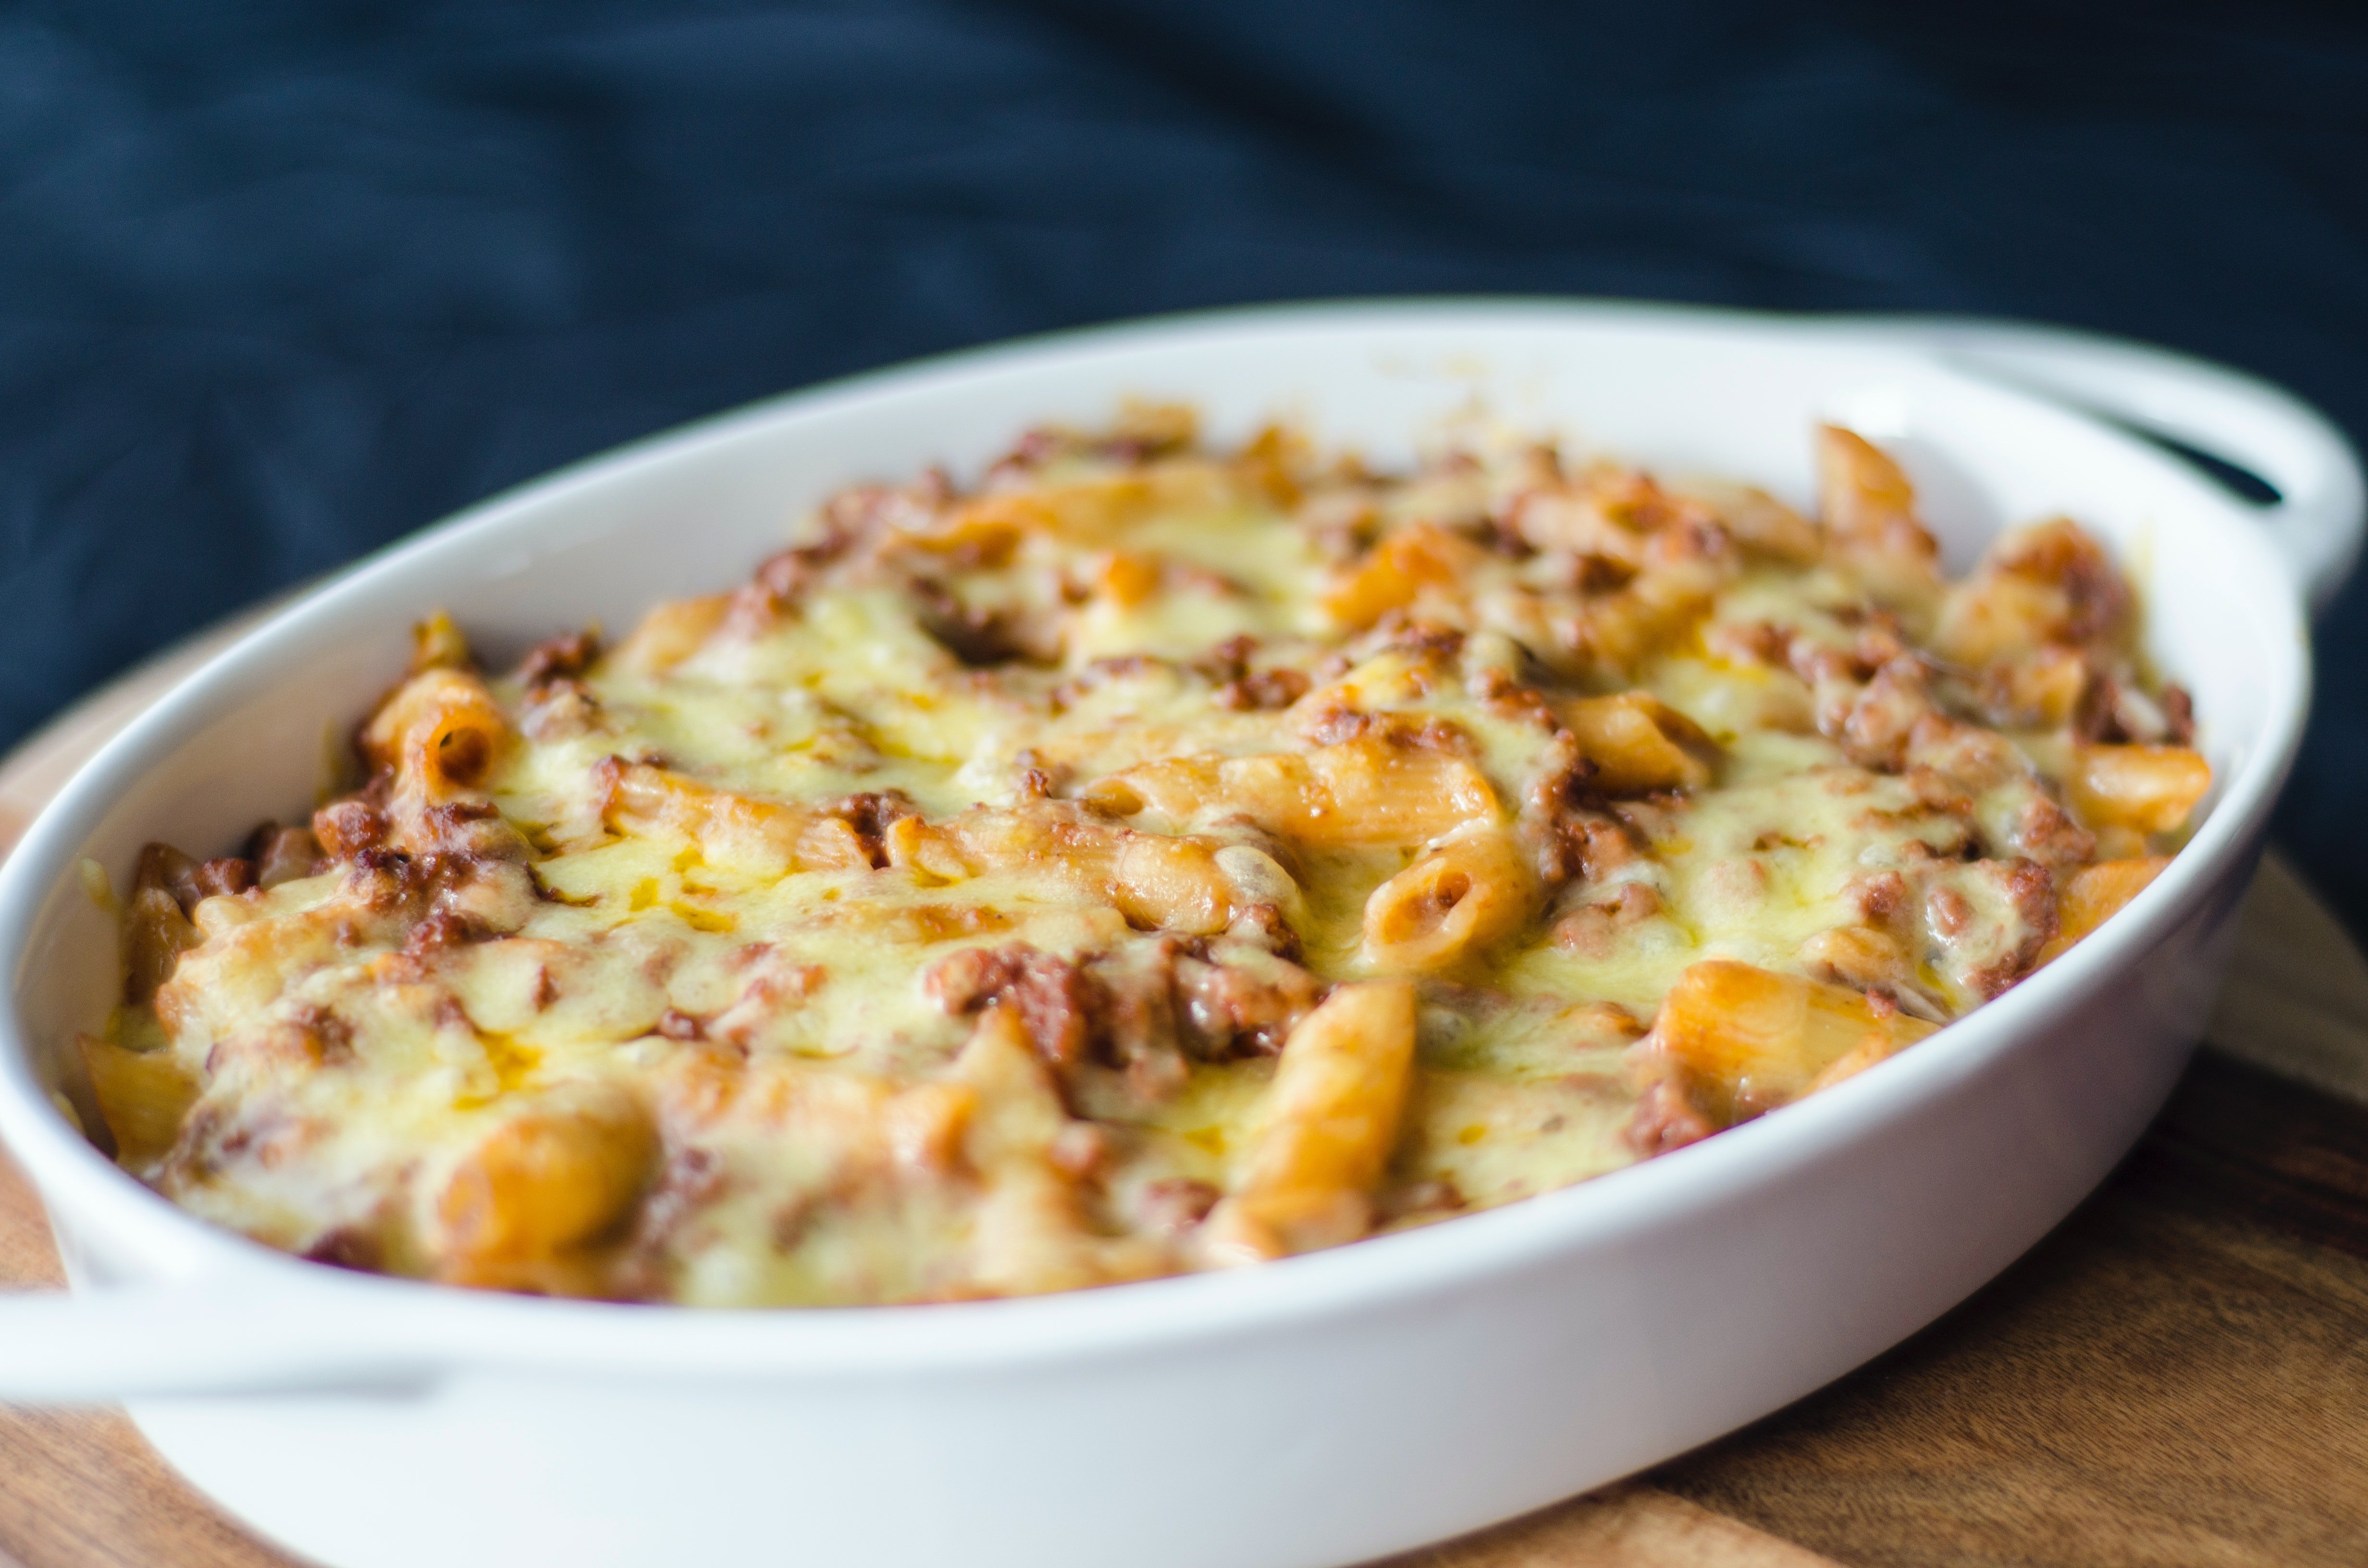 Pictured - a close-up photo of baked mac | Source: Pexels 